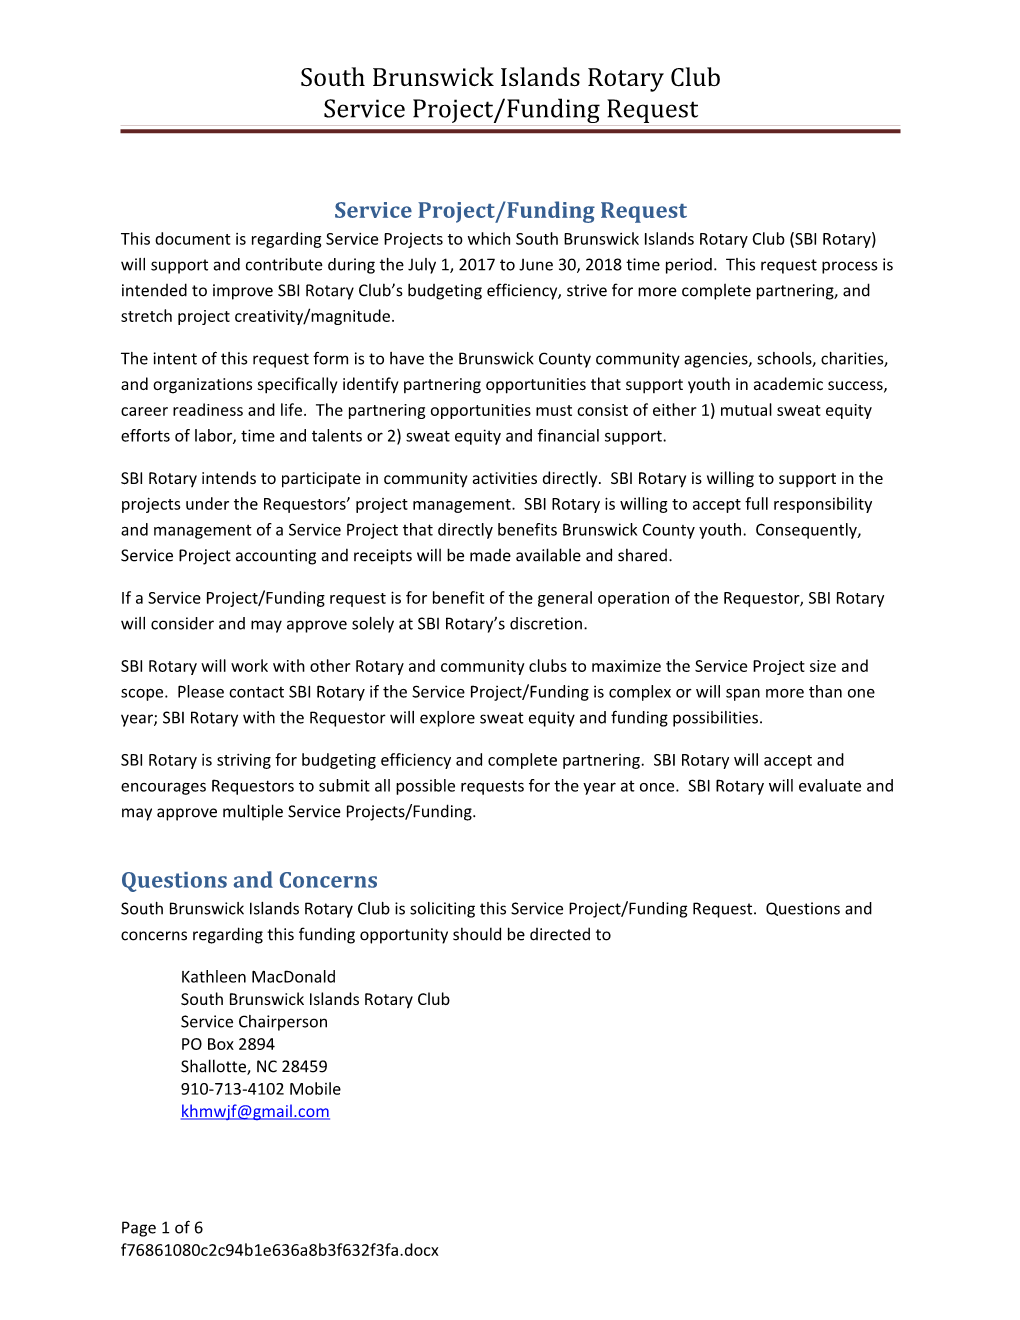 South Brunswick Islands Rotary Club Service Project/Funding Request